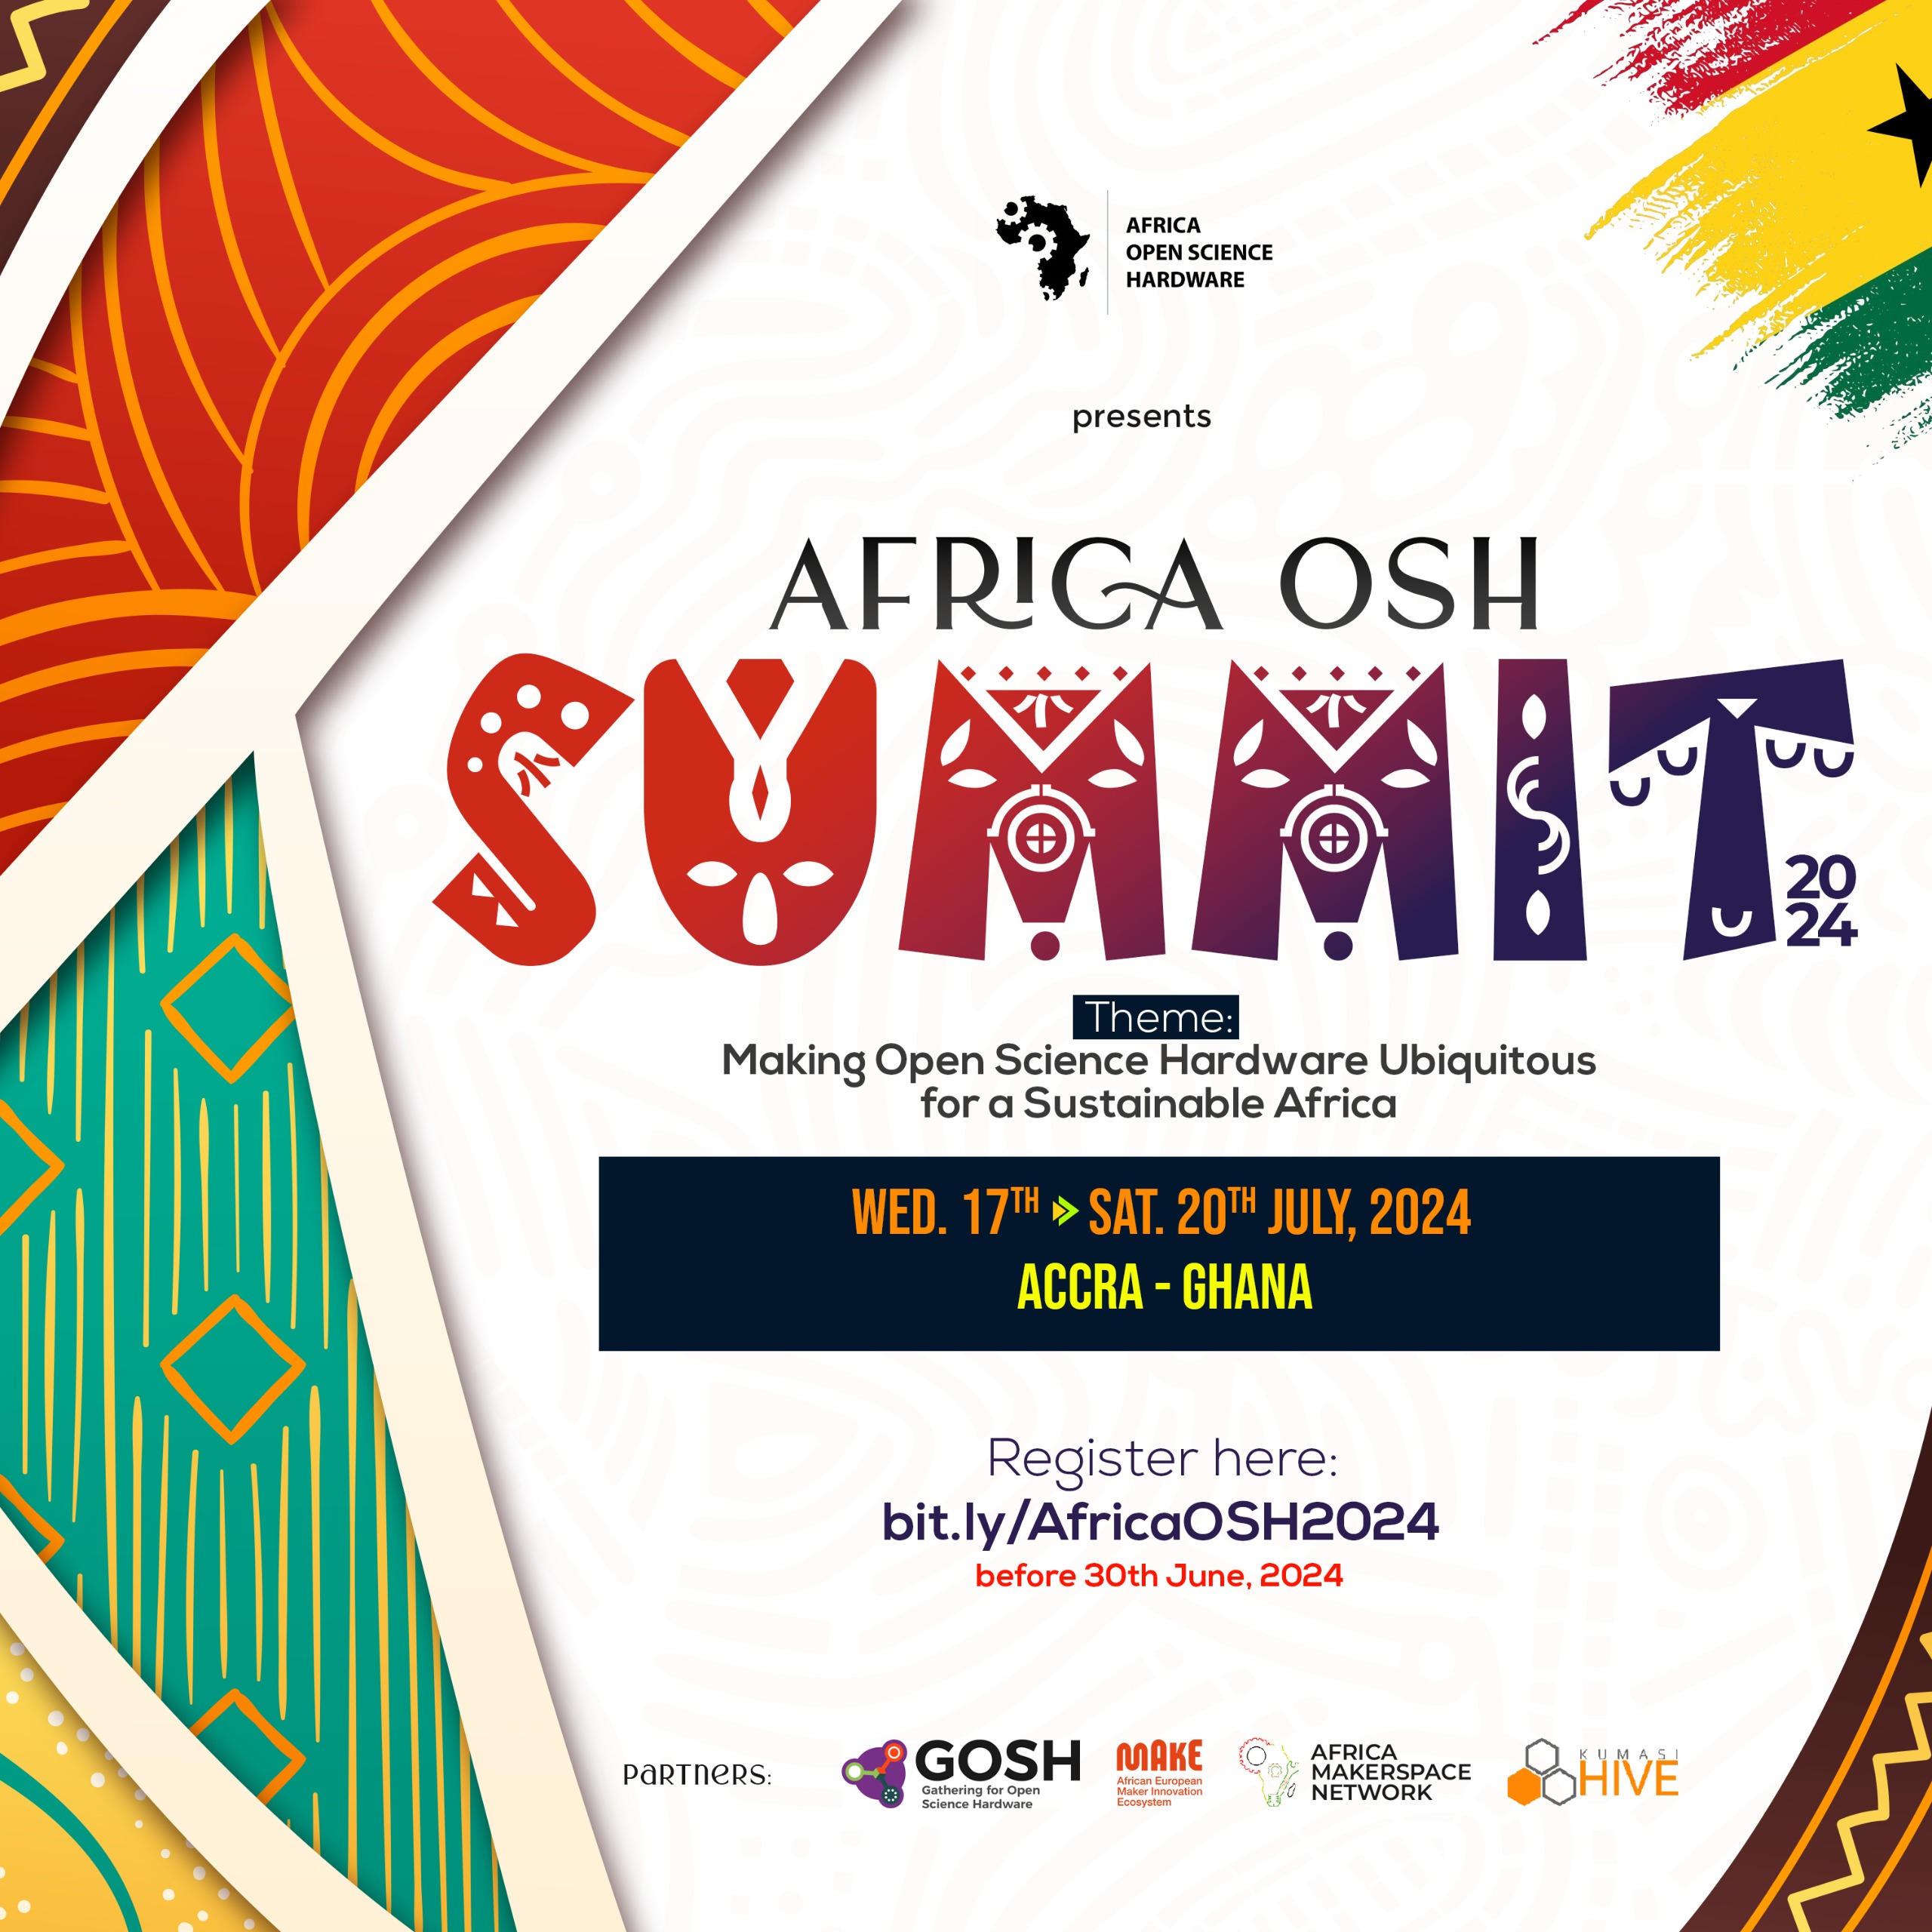 Africa OSH Summit, Making Open Science Hardware Ubiquitous for a Sustainable Africa, Wednesday 17th till Saturday 20th July in Accra, Ghana